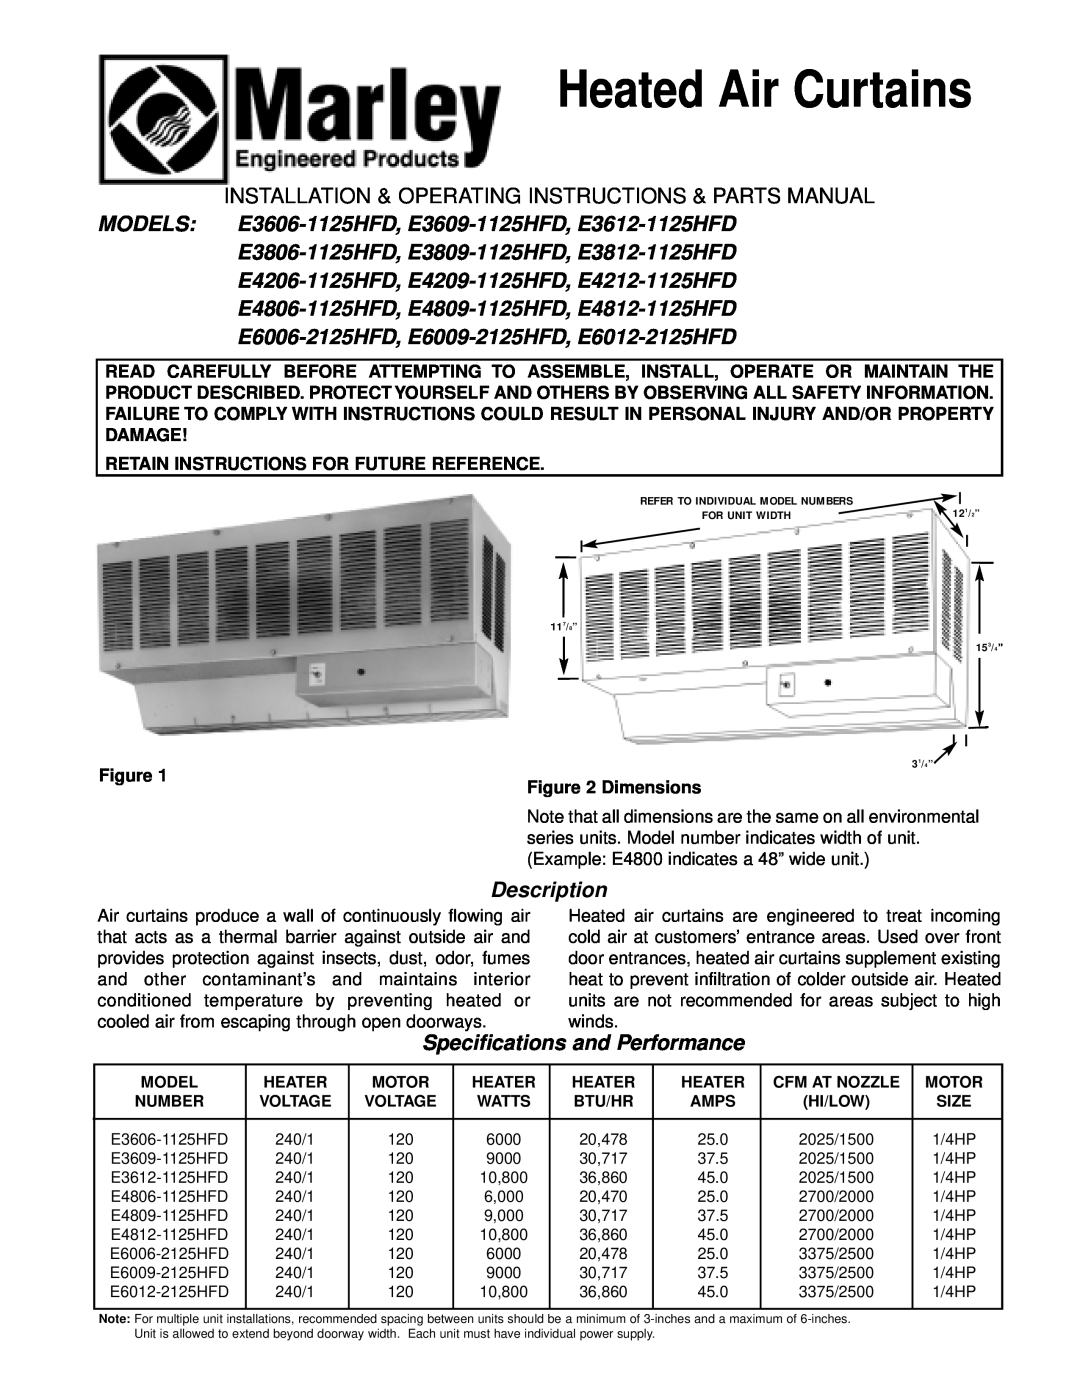 Marley Engineered Products E6009-2125HFD specifications Heated Air Curtains, E3806-1125HFD, E3809-1125HFD, E3812-1125HFD 